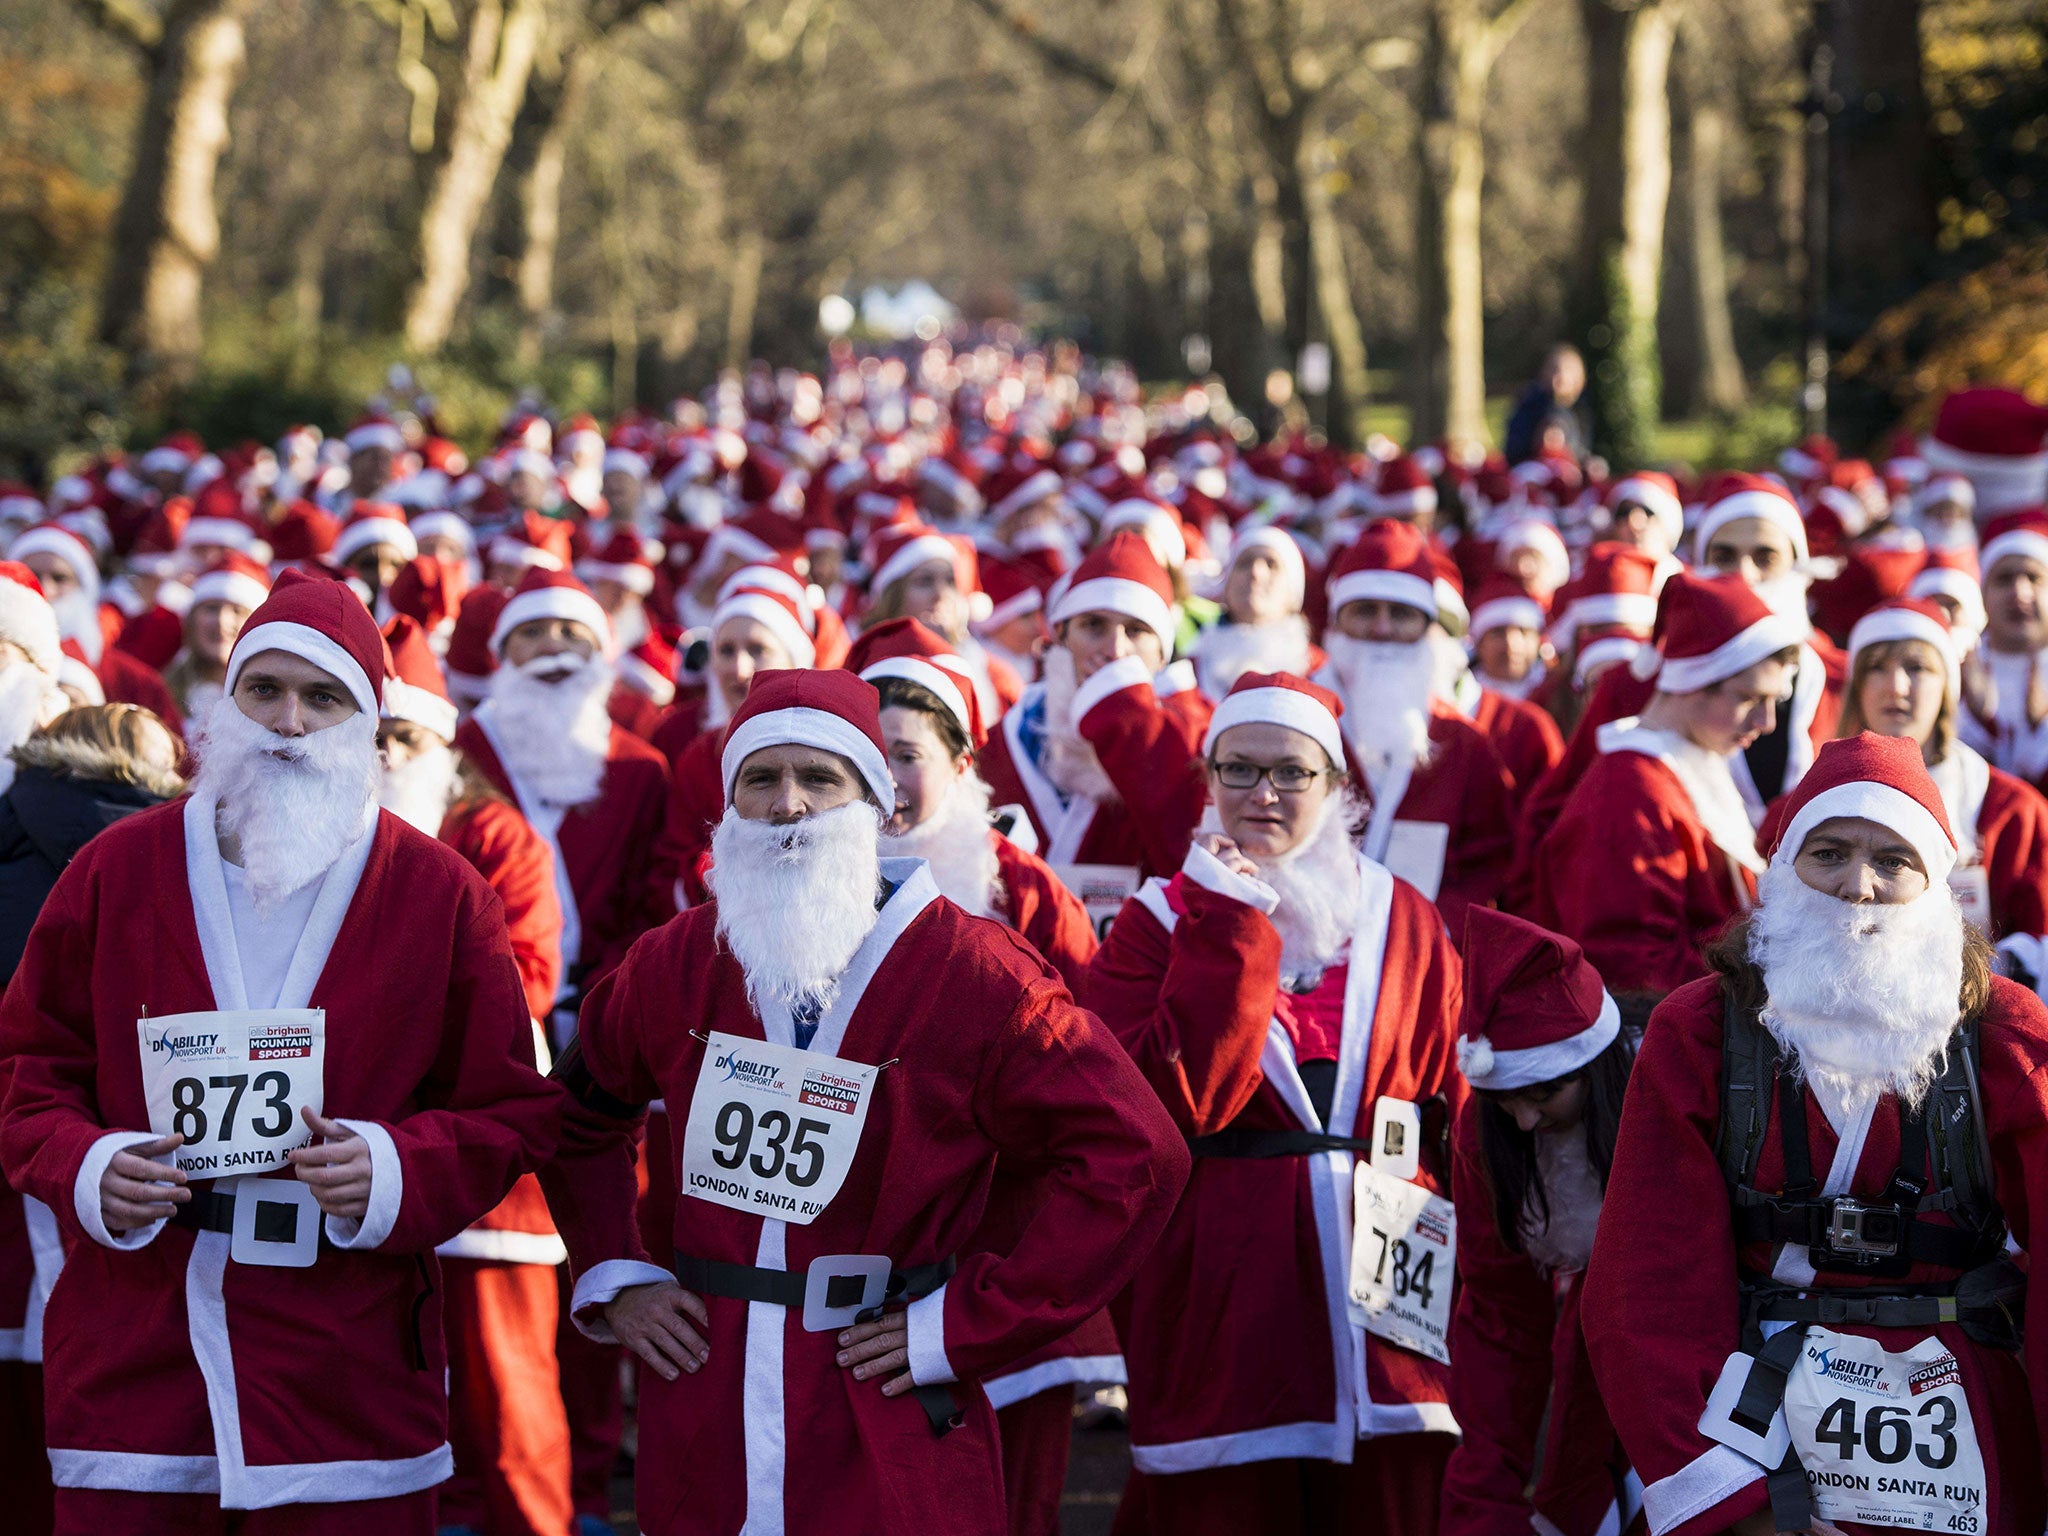 Charity runners dressed as Father Christmas await the start of the 'Santa Run' charity fun run in Battersea Park in London. Hundreds of participants dressed in Santa suits and white beards ran through Battersea park in aid of winter sports charity Disabil